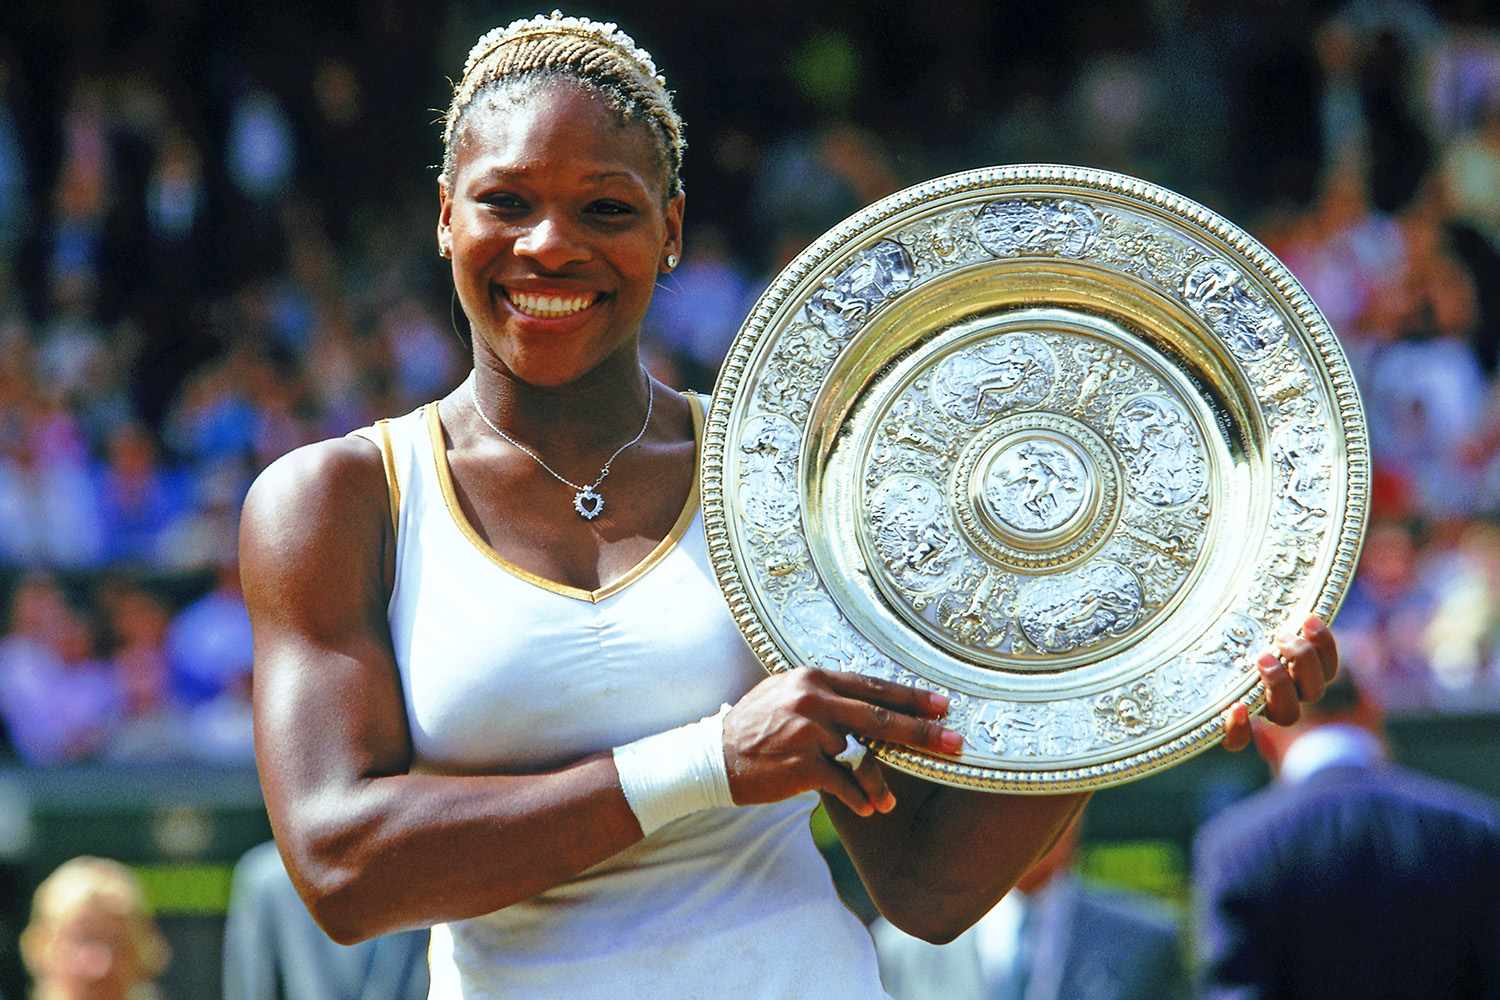 WIMBLEDON - JULY 6: Wimbledon Ladies champion Serena Williams of the USA poses with the winning trophy at the Wimbledon Lawn Tennis Championship held at the All England Lawn Tennis and Croquet Club in Wimbledon, London on July 6, 2002. (Photo by Mike Hewitt/Getty Images)